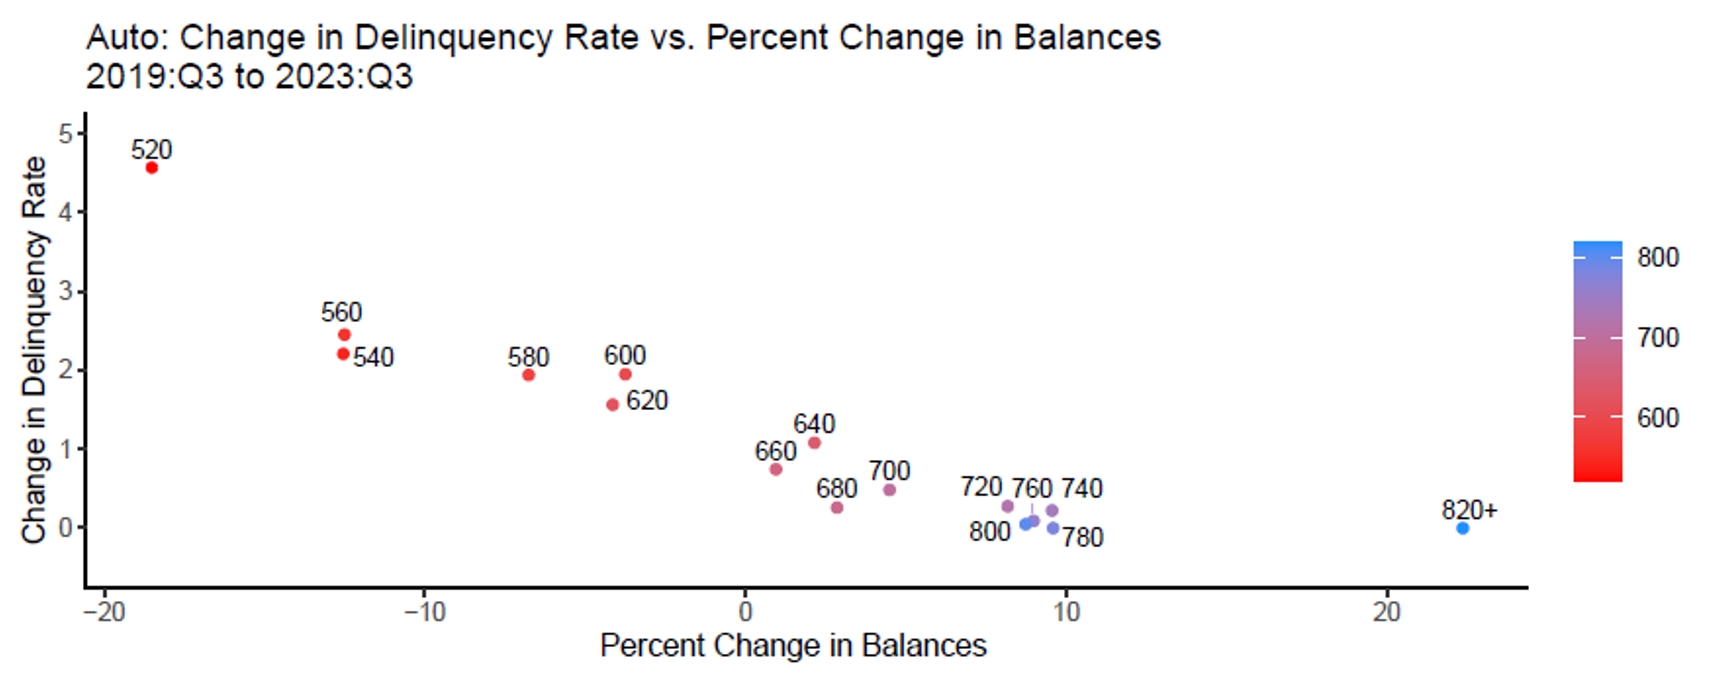 Figure 3. Delinquency rates rose over the pandemic the most for lower-rated borrowers, who also have seen their balances decrease. See accessible link for data.